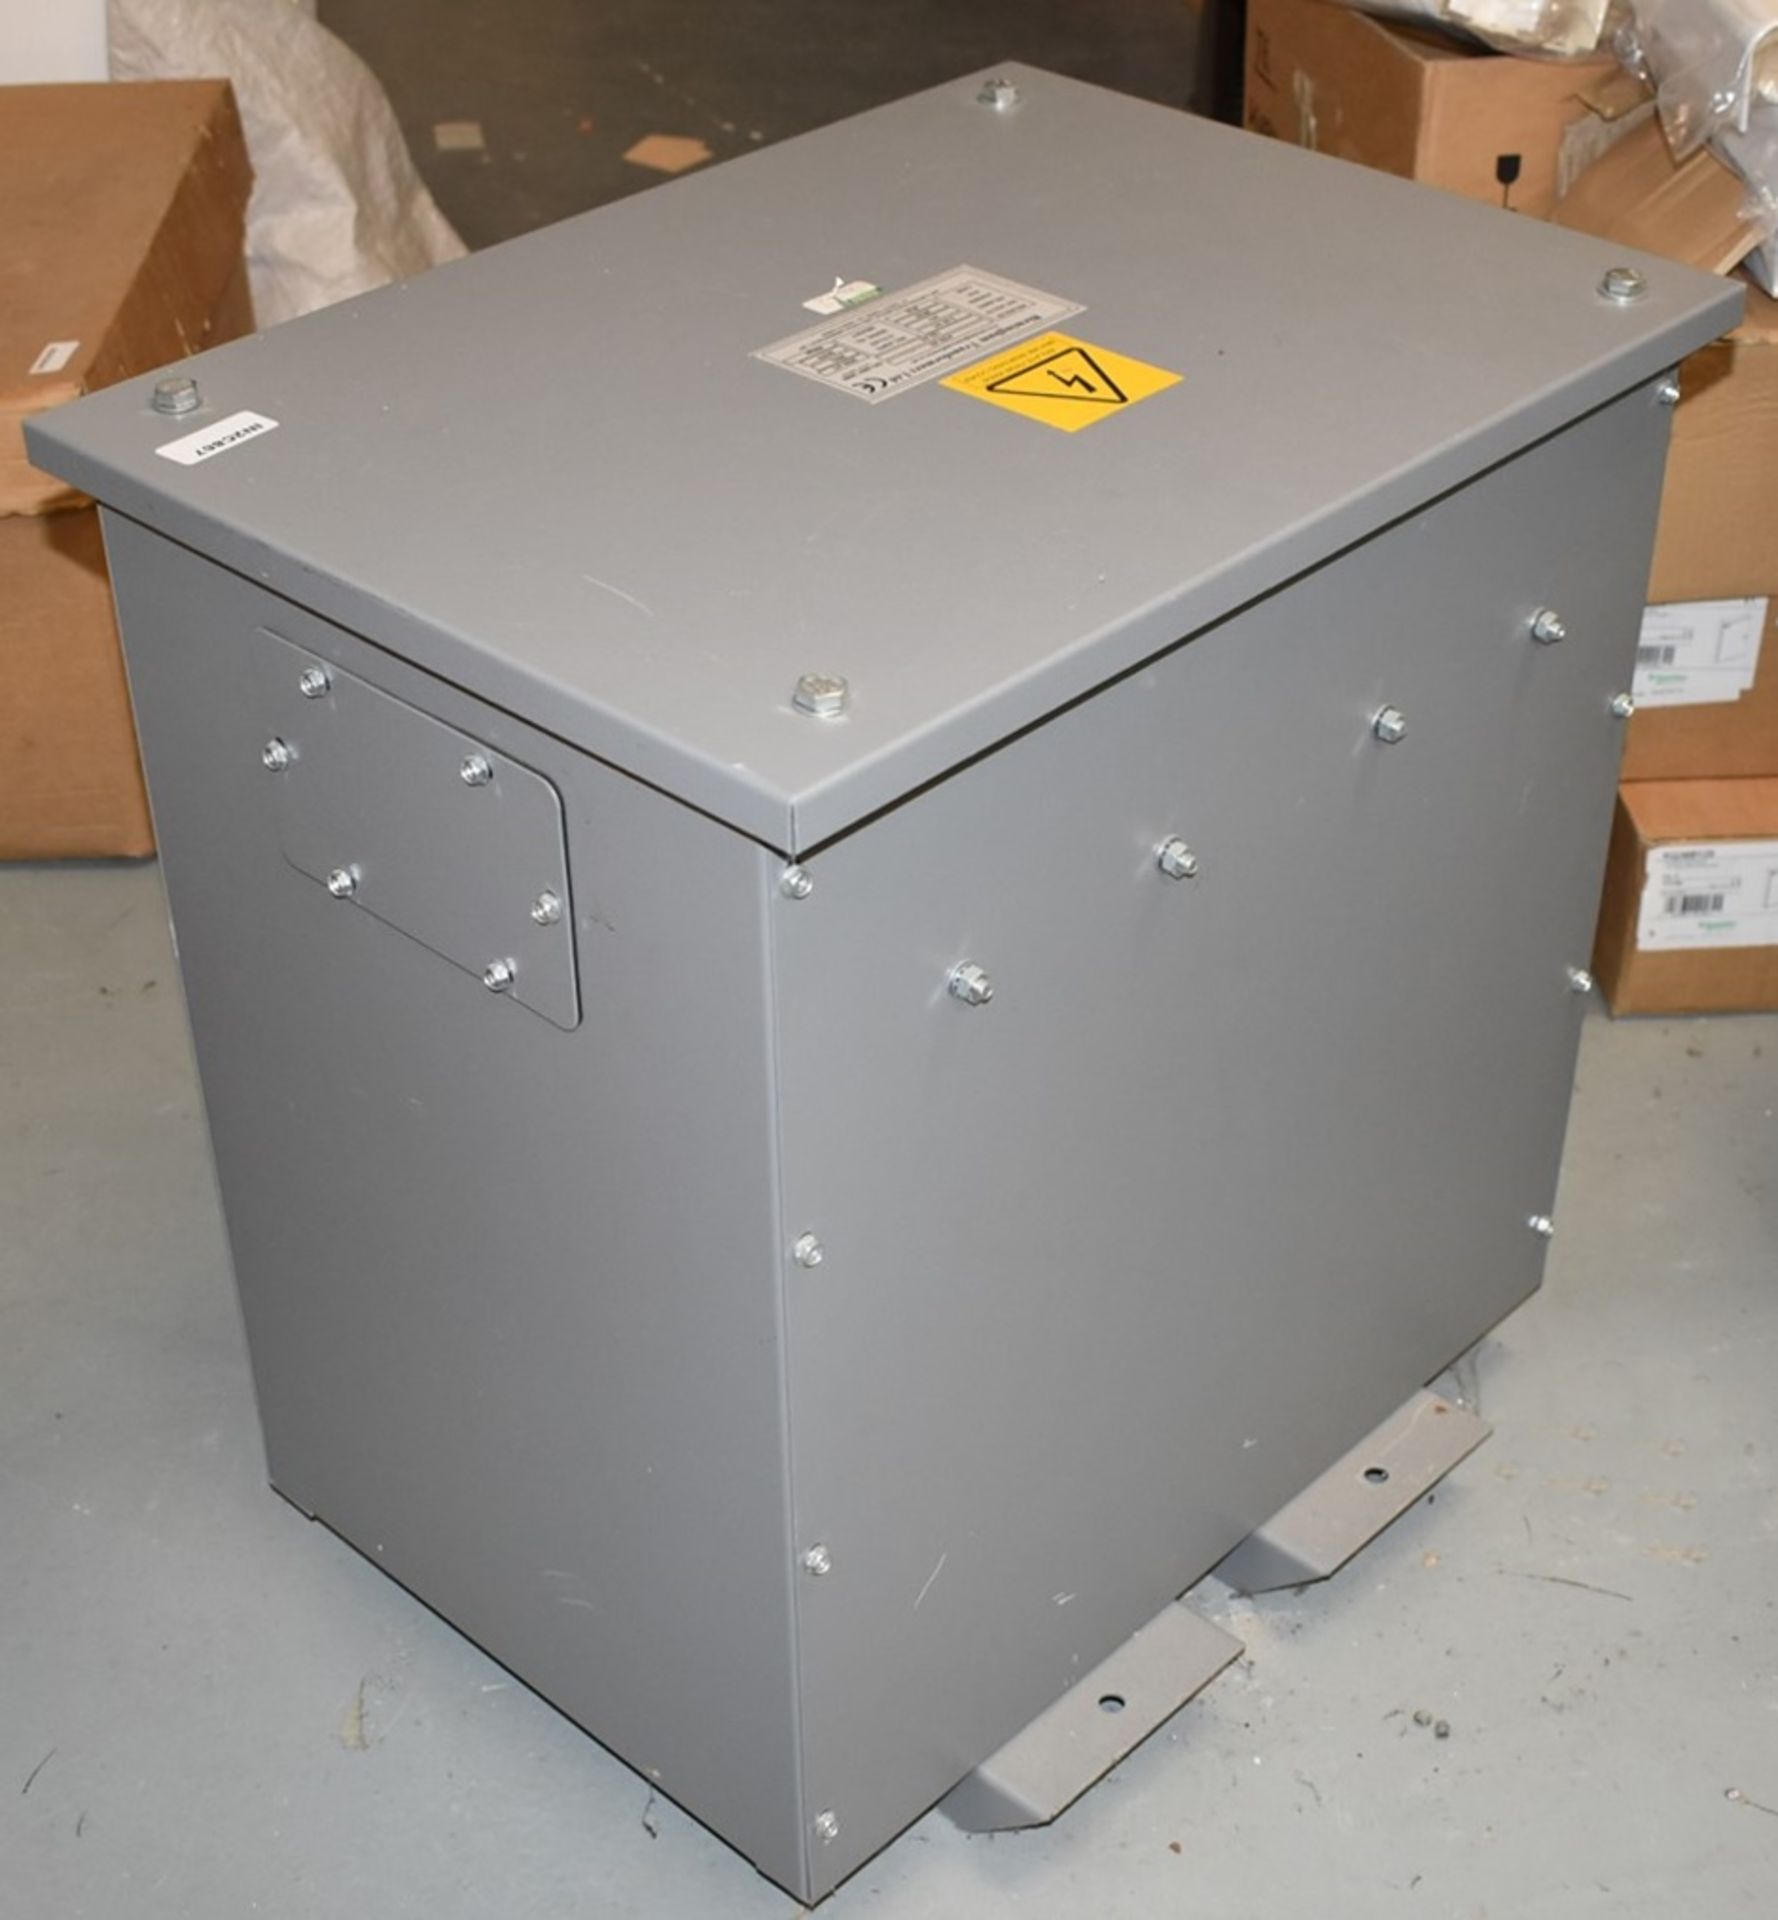 1 x Industrial 3 Phase Site Transformer With Six Outlets, Steel Enclosure & Integrated Fork Pockets - Image 4 of 7